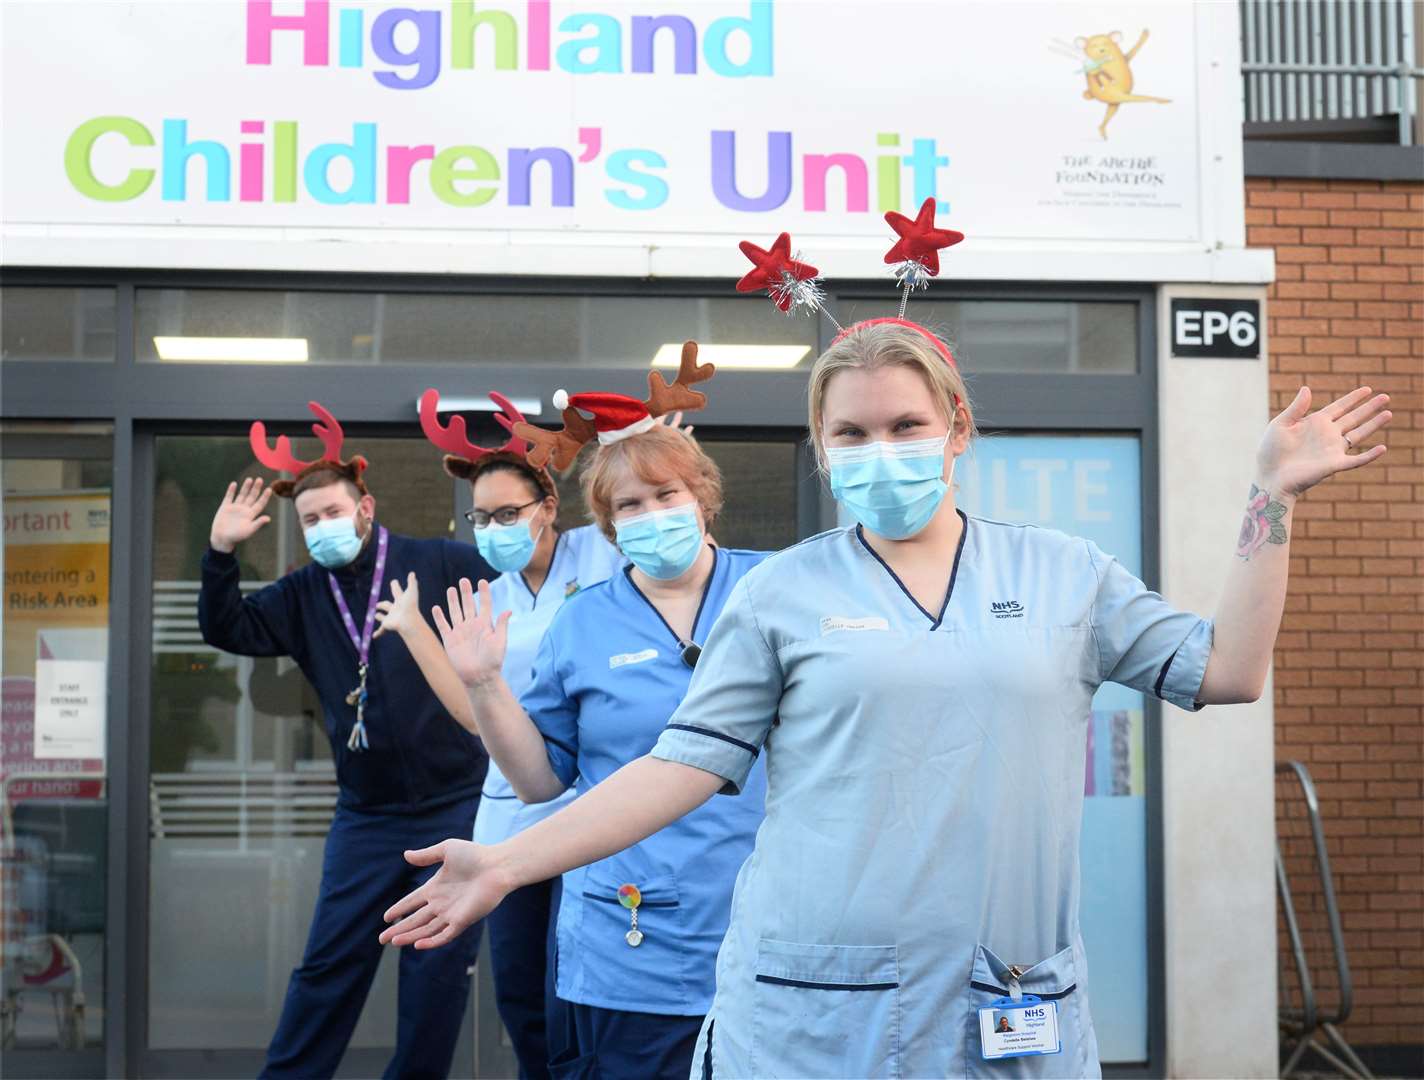 Staff at the Highland Children's Unit at Raigmore Hospital are delighted by generous donations. Front to back: Cyndelle Belshaw, Fiona Christie, Rebecca Abrahams and Peter Nowikowski. Picture: Gary Anthony